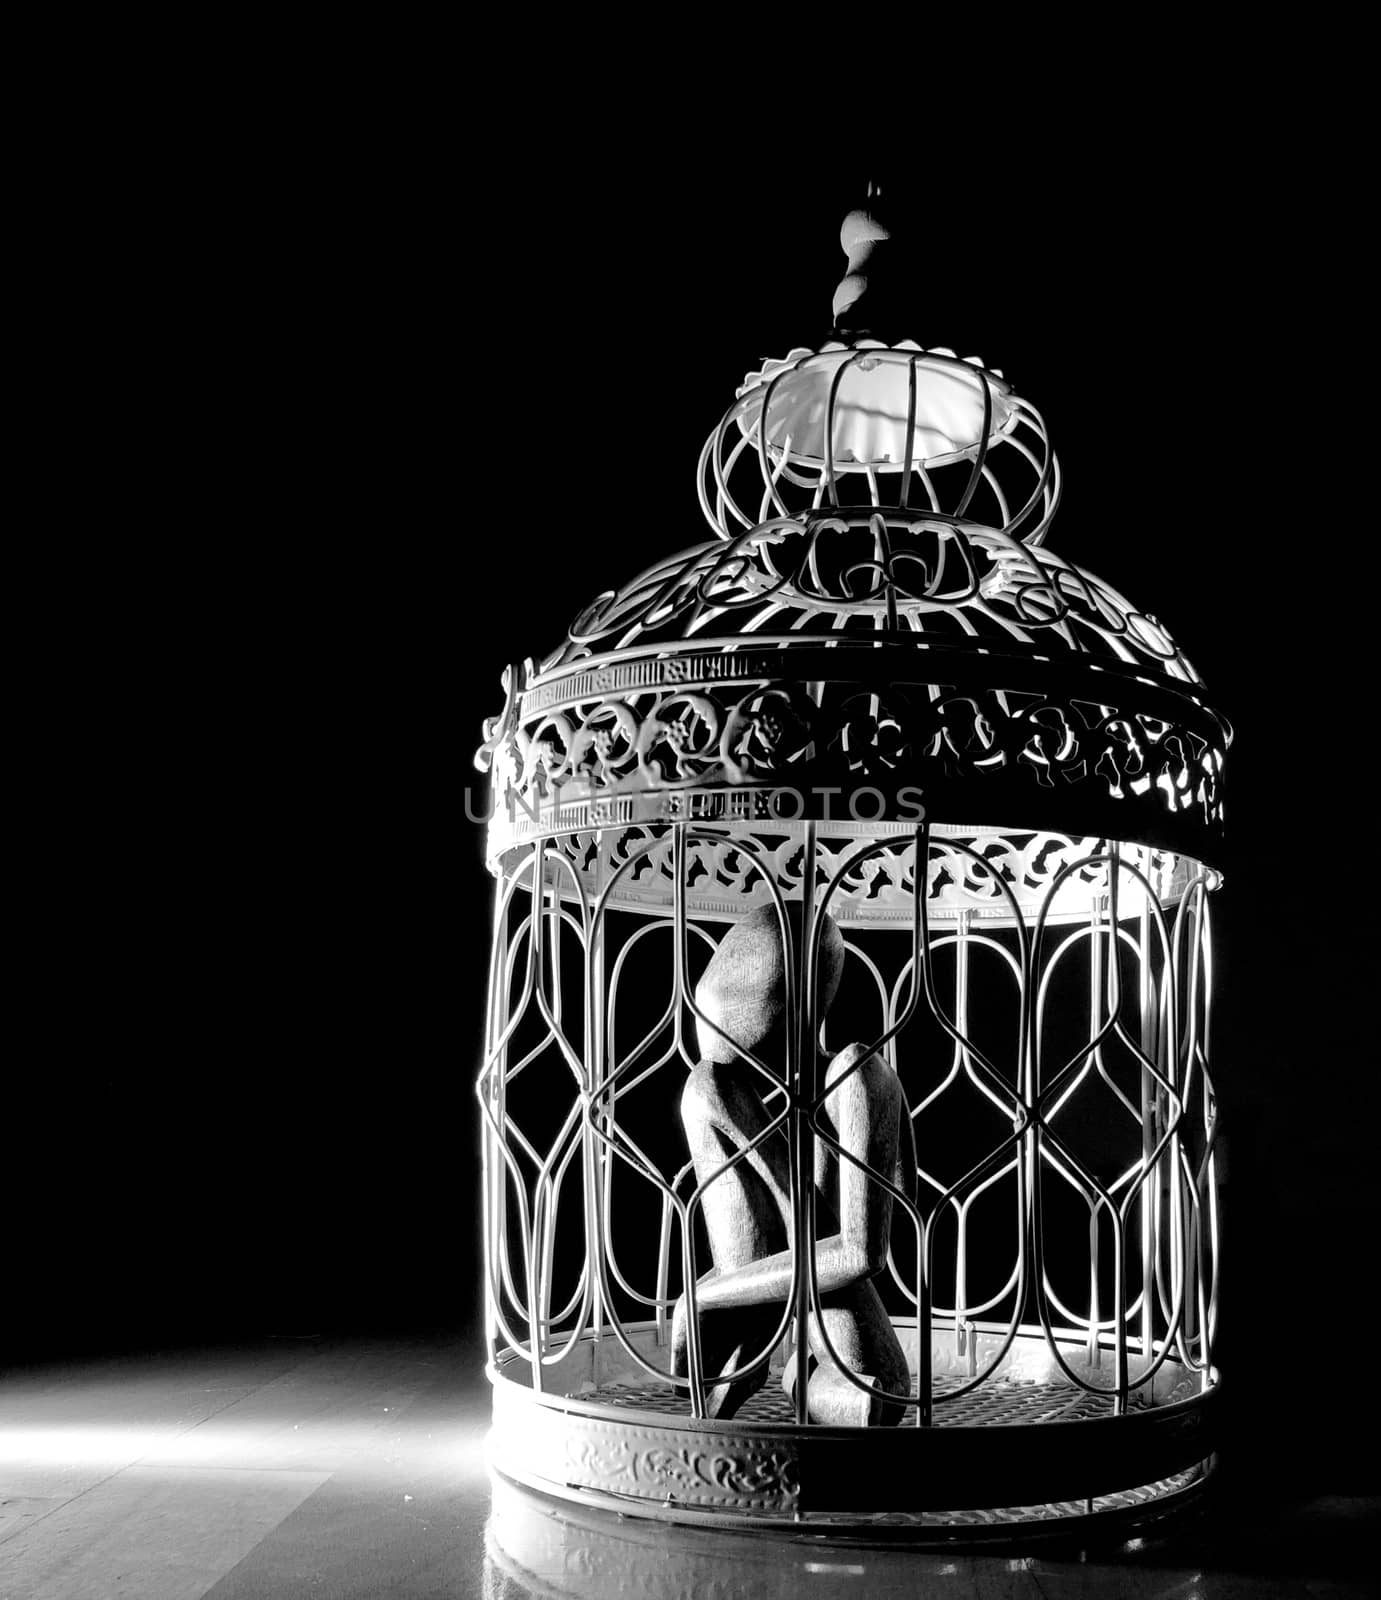 Wooden figurine in a cage